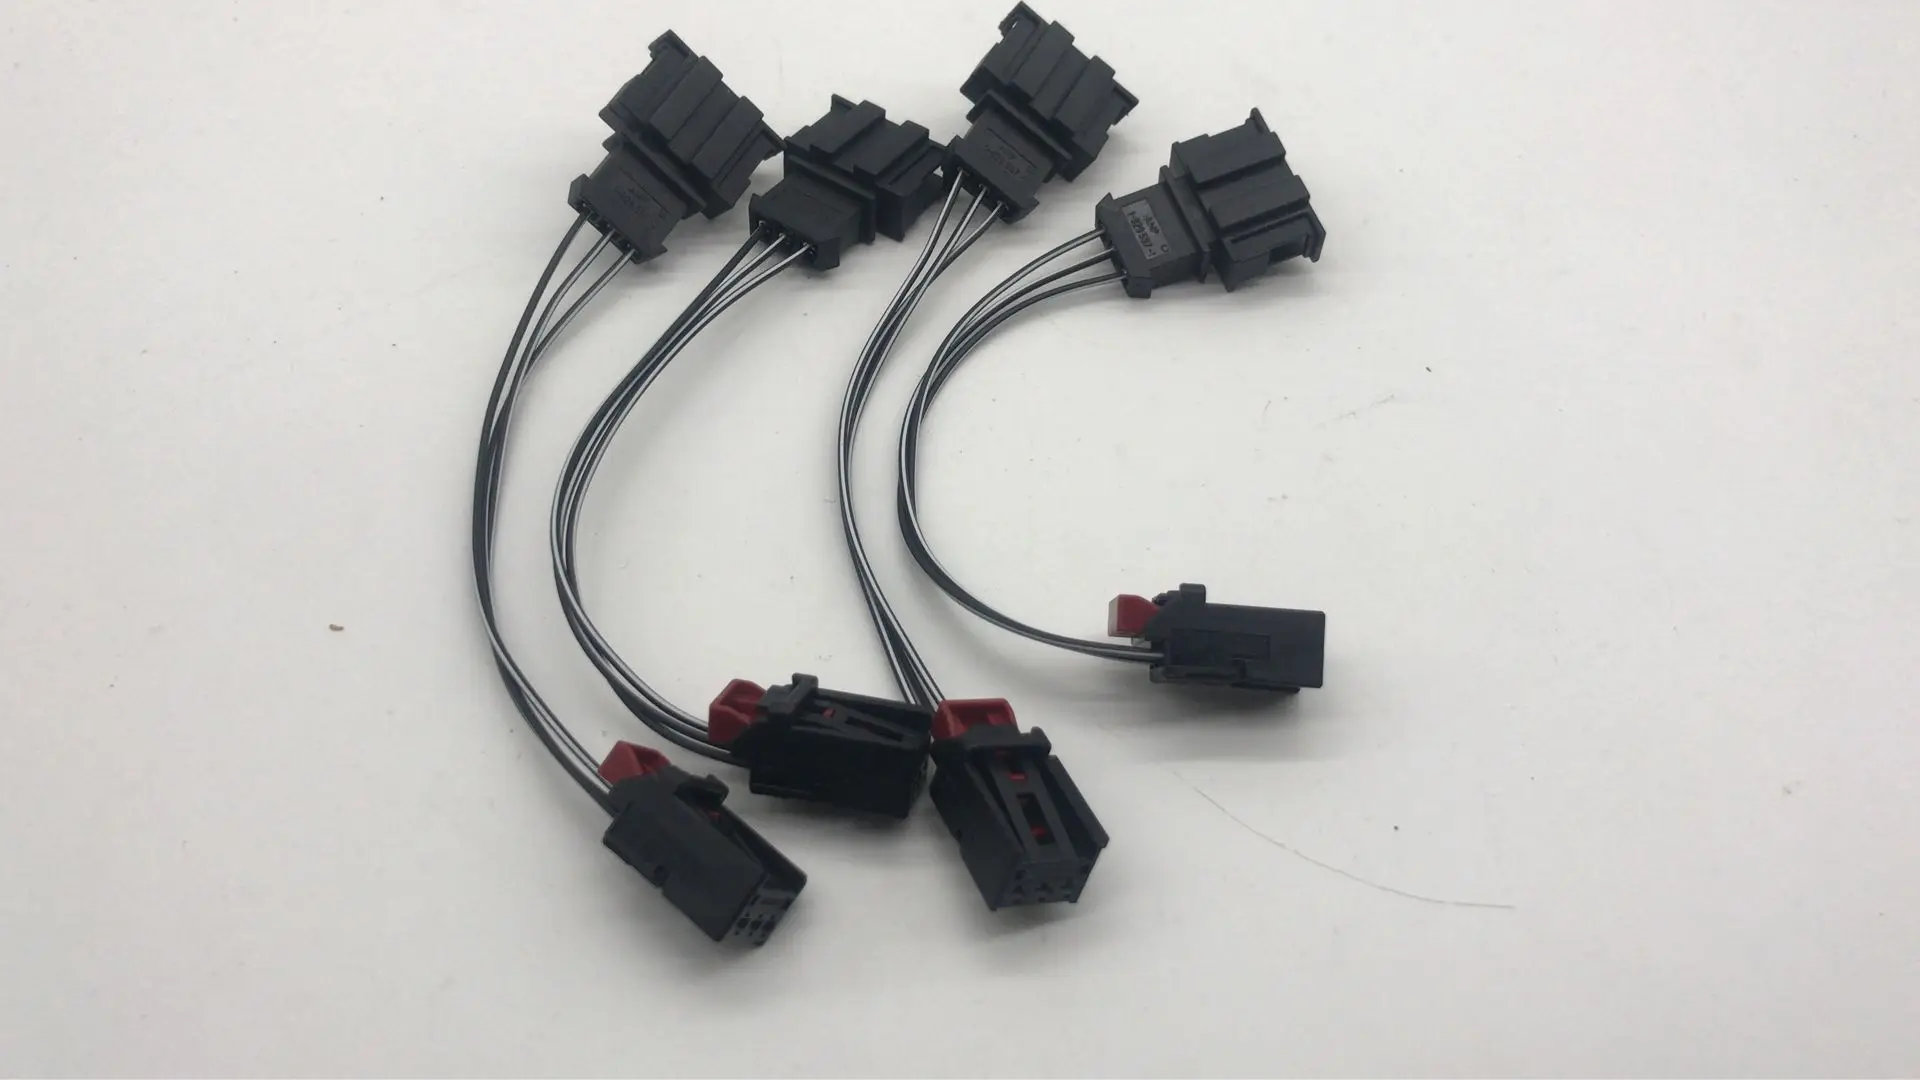 Feed on Caliber Early Led Tail Light Rear Lamp Cable Adapter Harness For Vw Golf 6 Mk6 Gti - Buy  Mk6 Tail Light Harness,Mk6 Led Harness,Tail Light Adapter Harness Product  on Alibaba.com